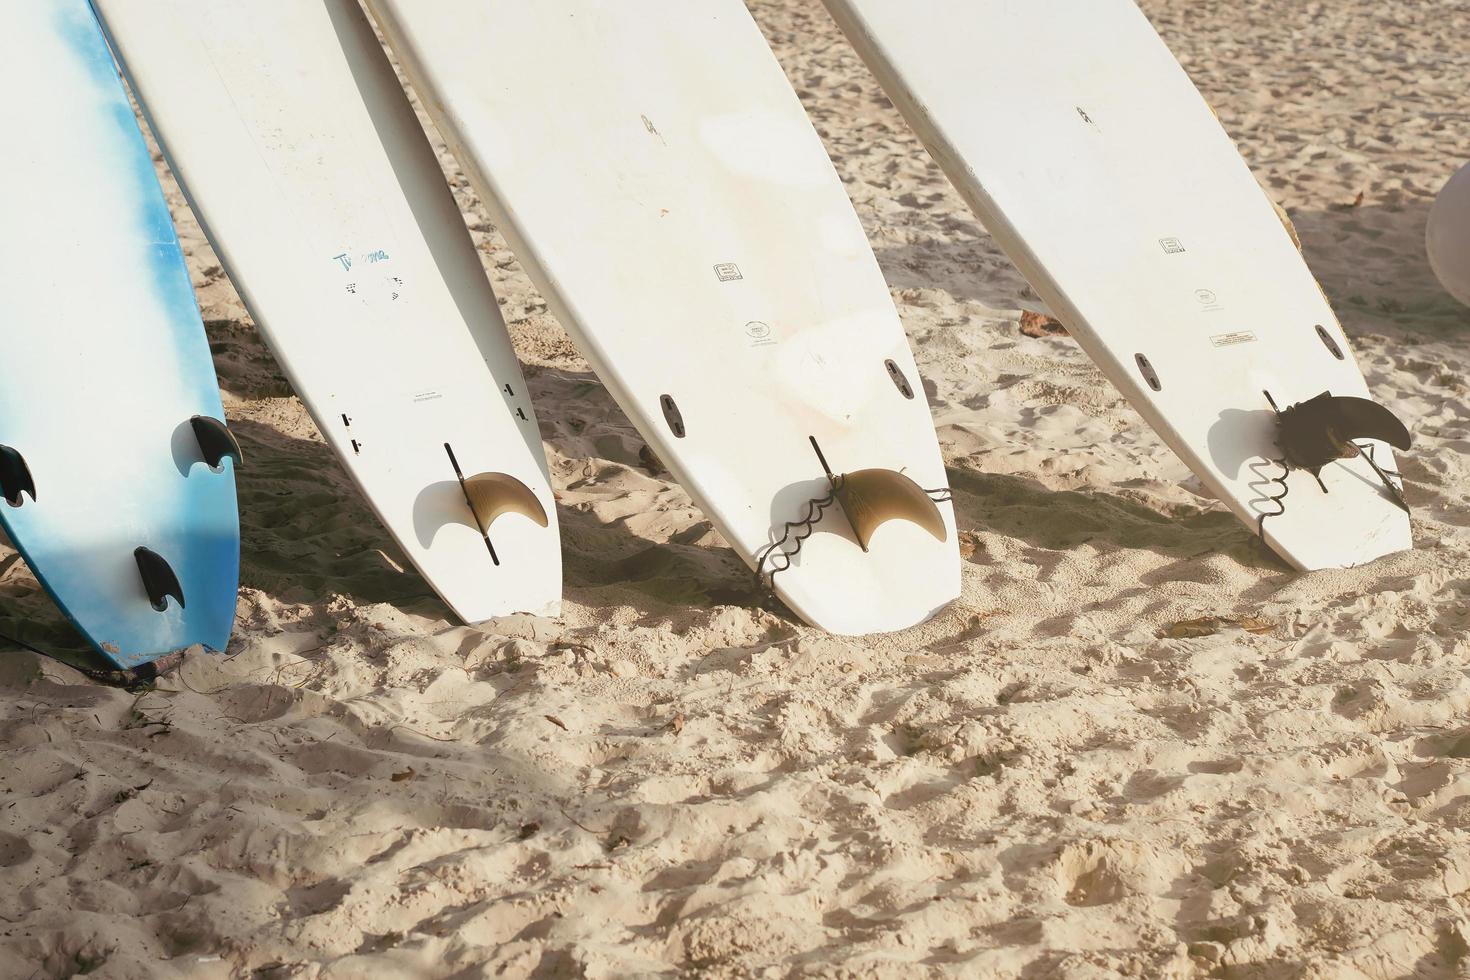 Surfboards setting up on sand beach during sunset summer sports day photo